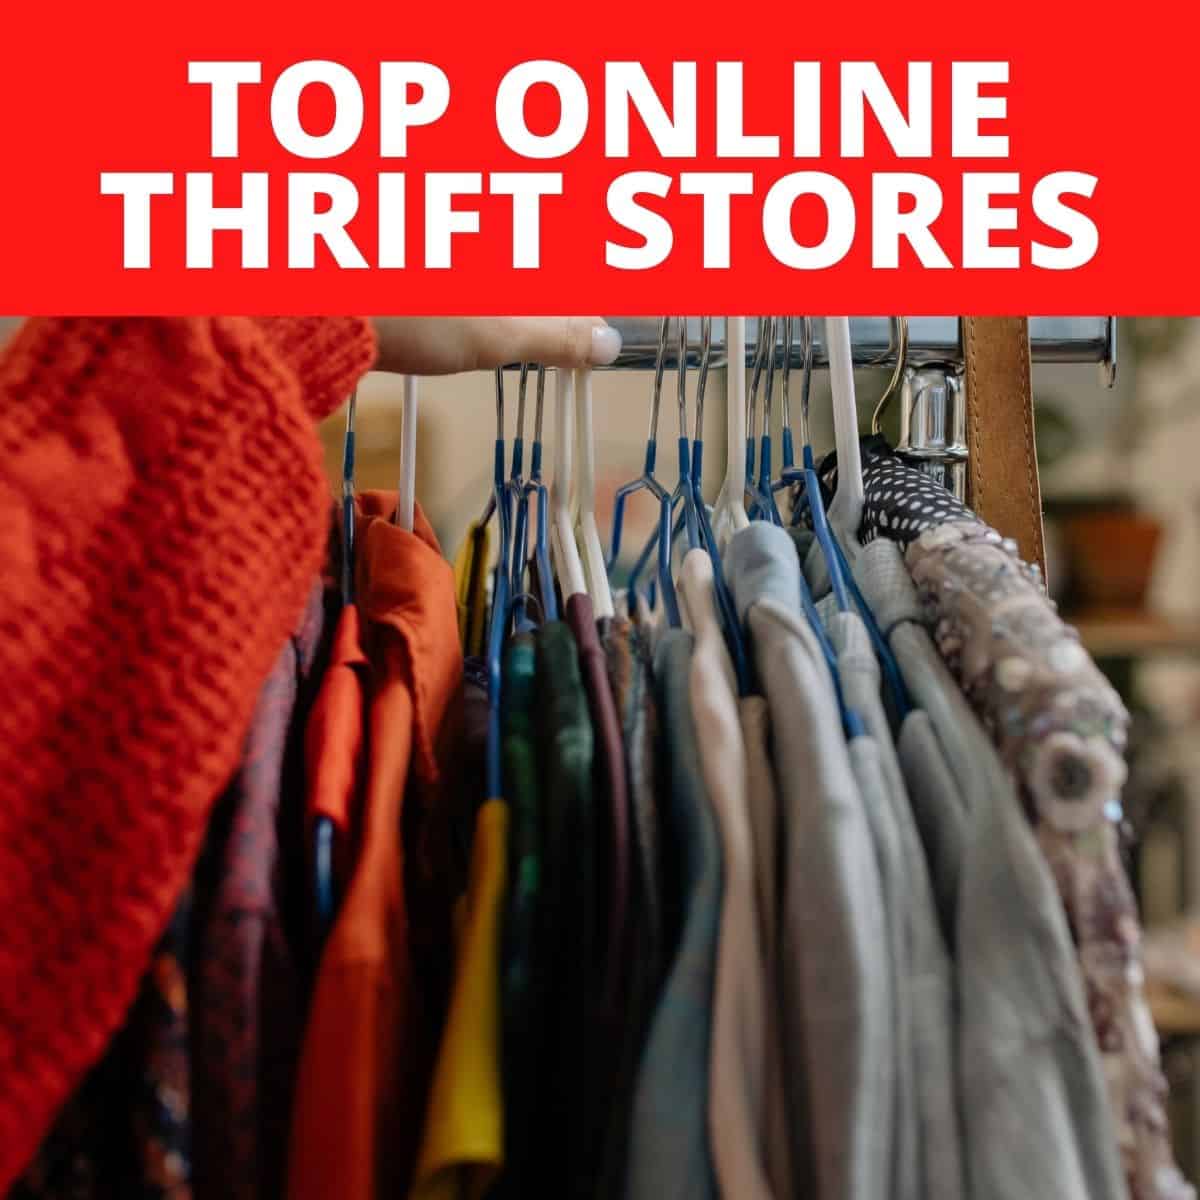 I rack of tops on hangers with text that says Top Online Thrift Stores.